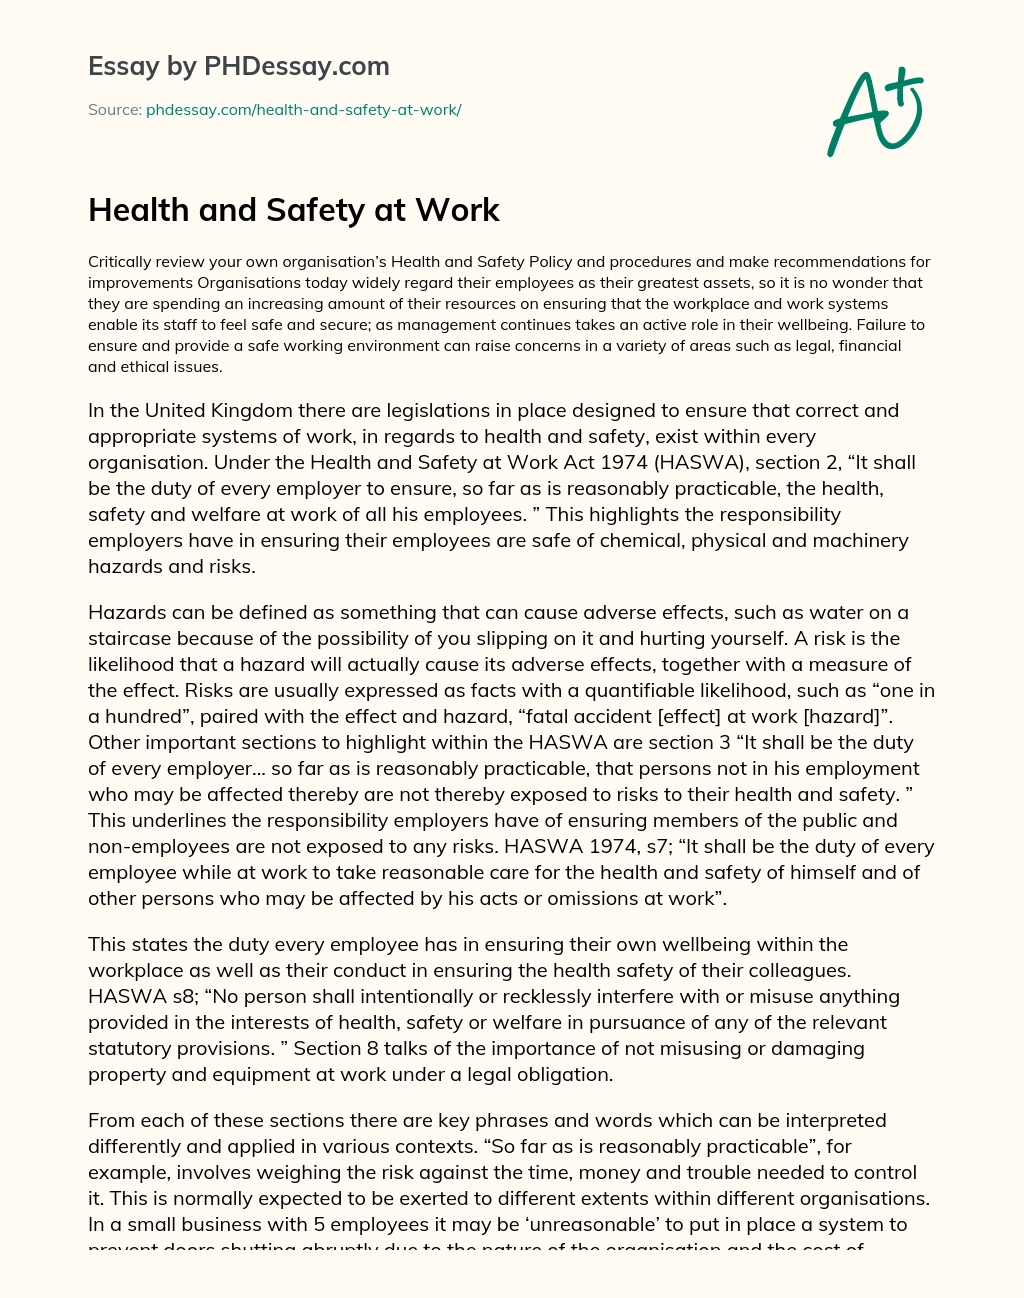 Health and Safety at Work essay